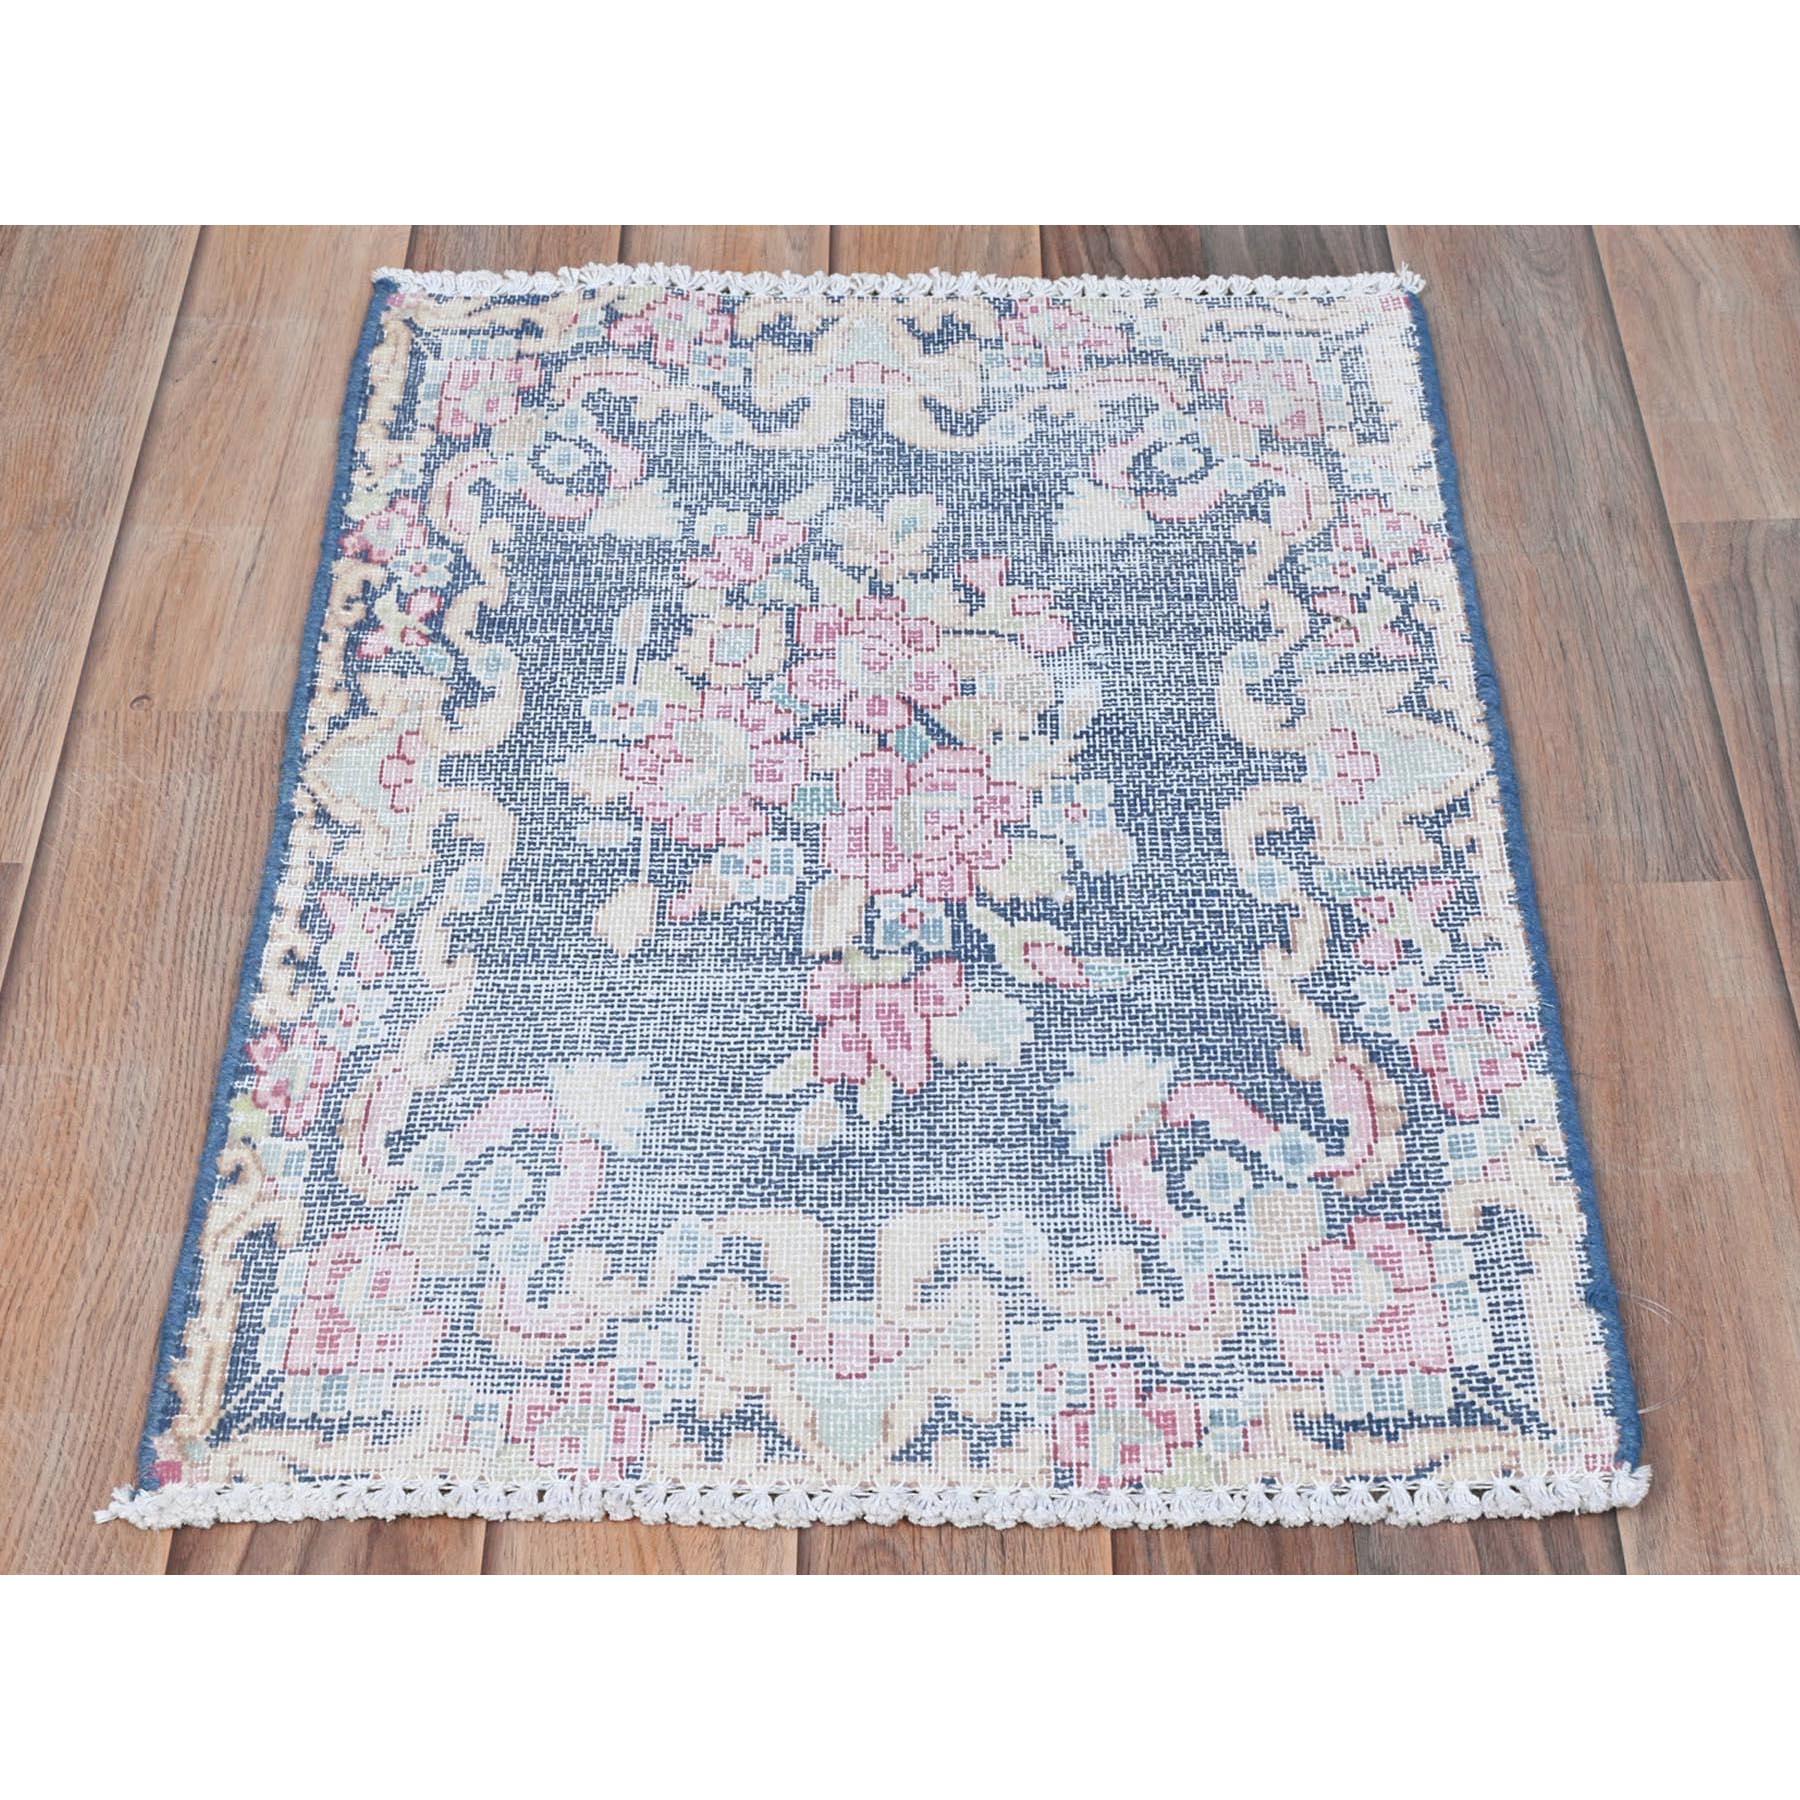 This fabulous hand-knotted carpet has been created and designed for extra strength and durability. This rug has been handcrafted for weeks in the traditional method that is used to make
Exact Rug Size in Feet and Inches : 1'6